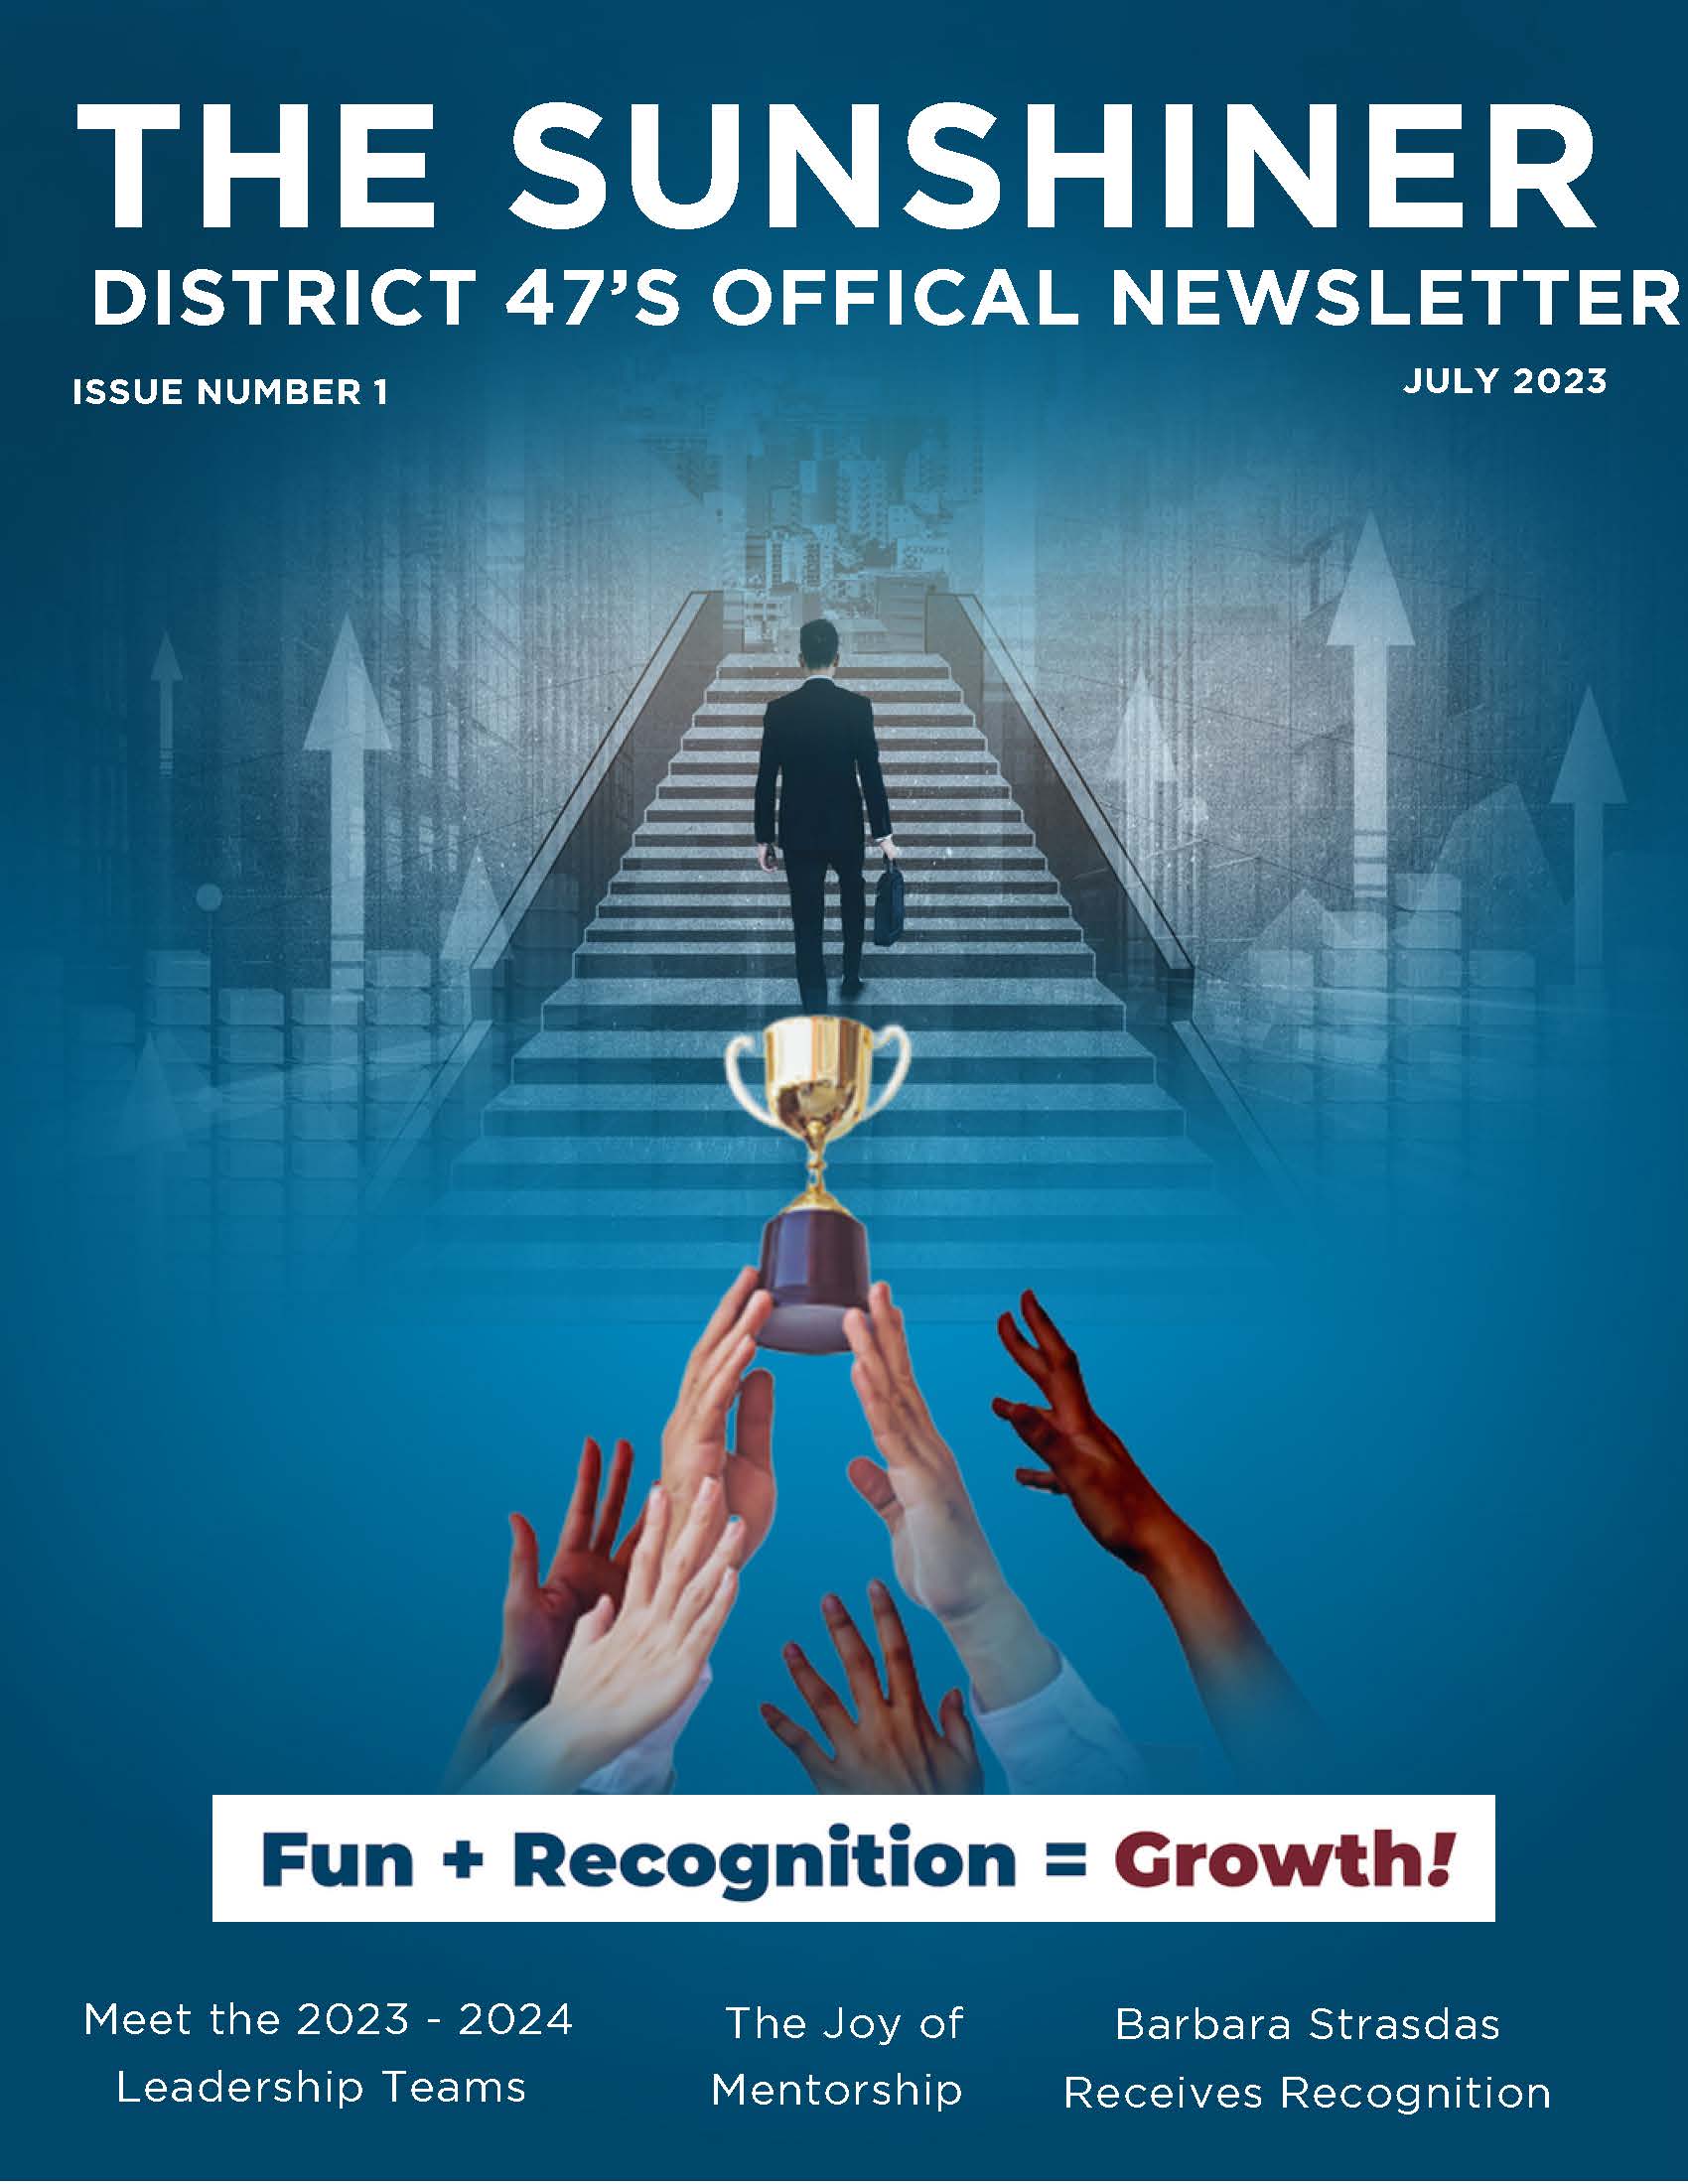 The Sunshiner District 47 Issue #1 July 2023